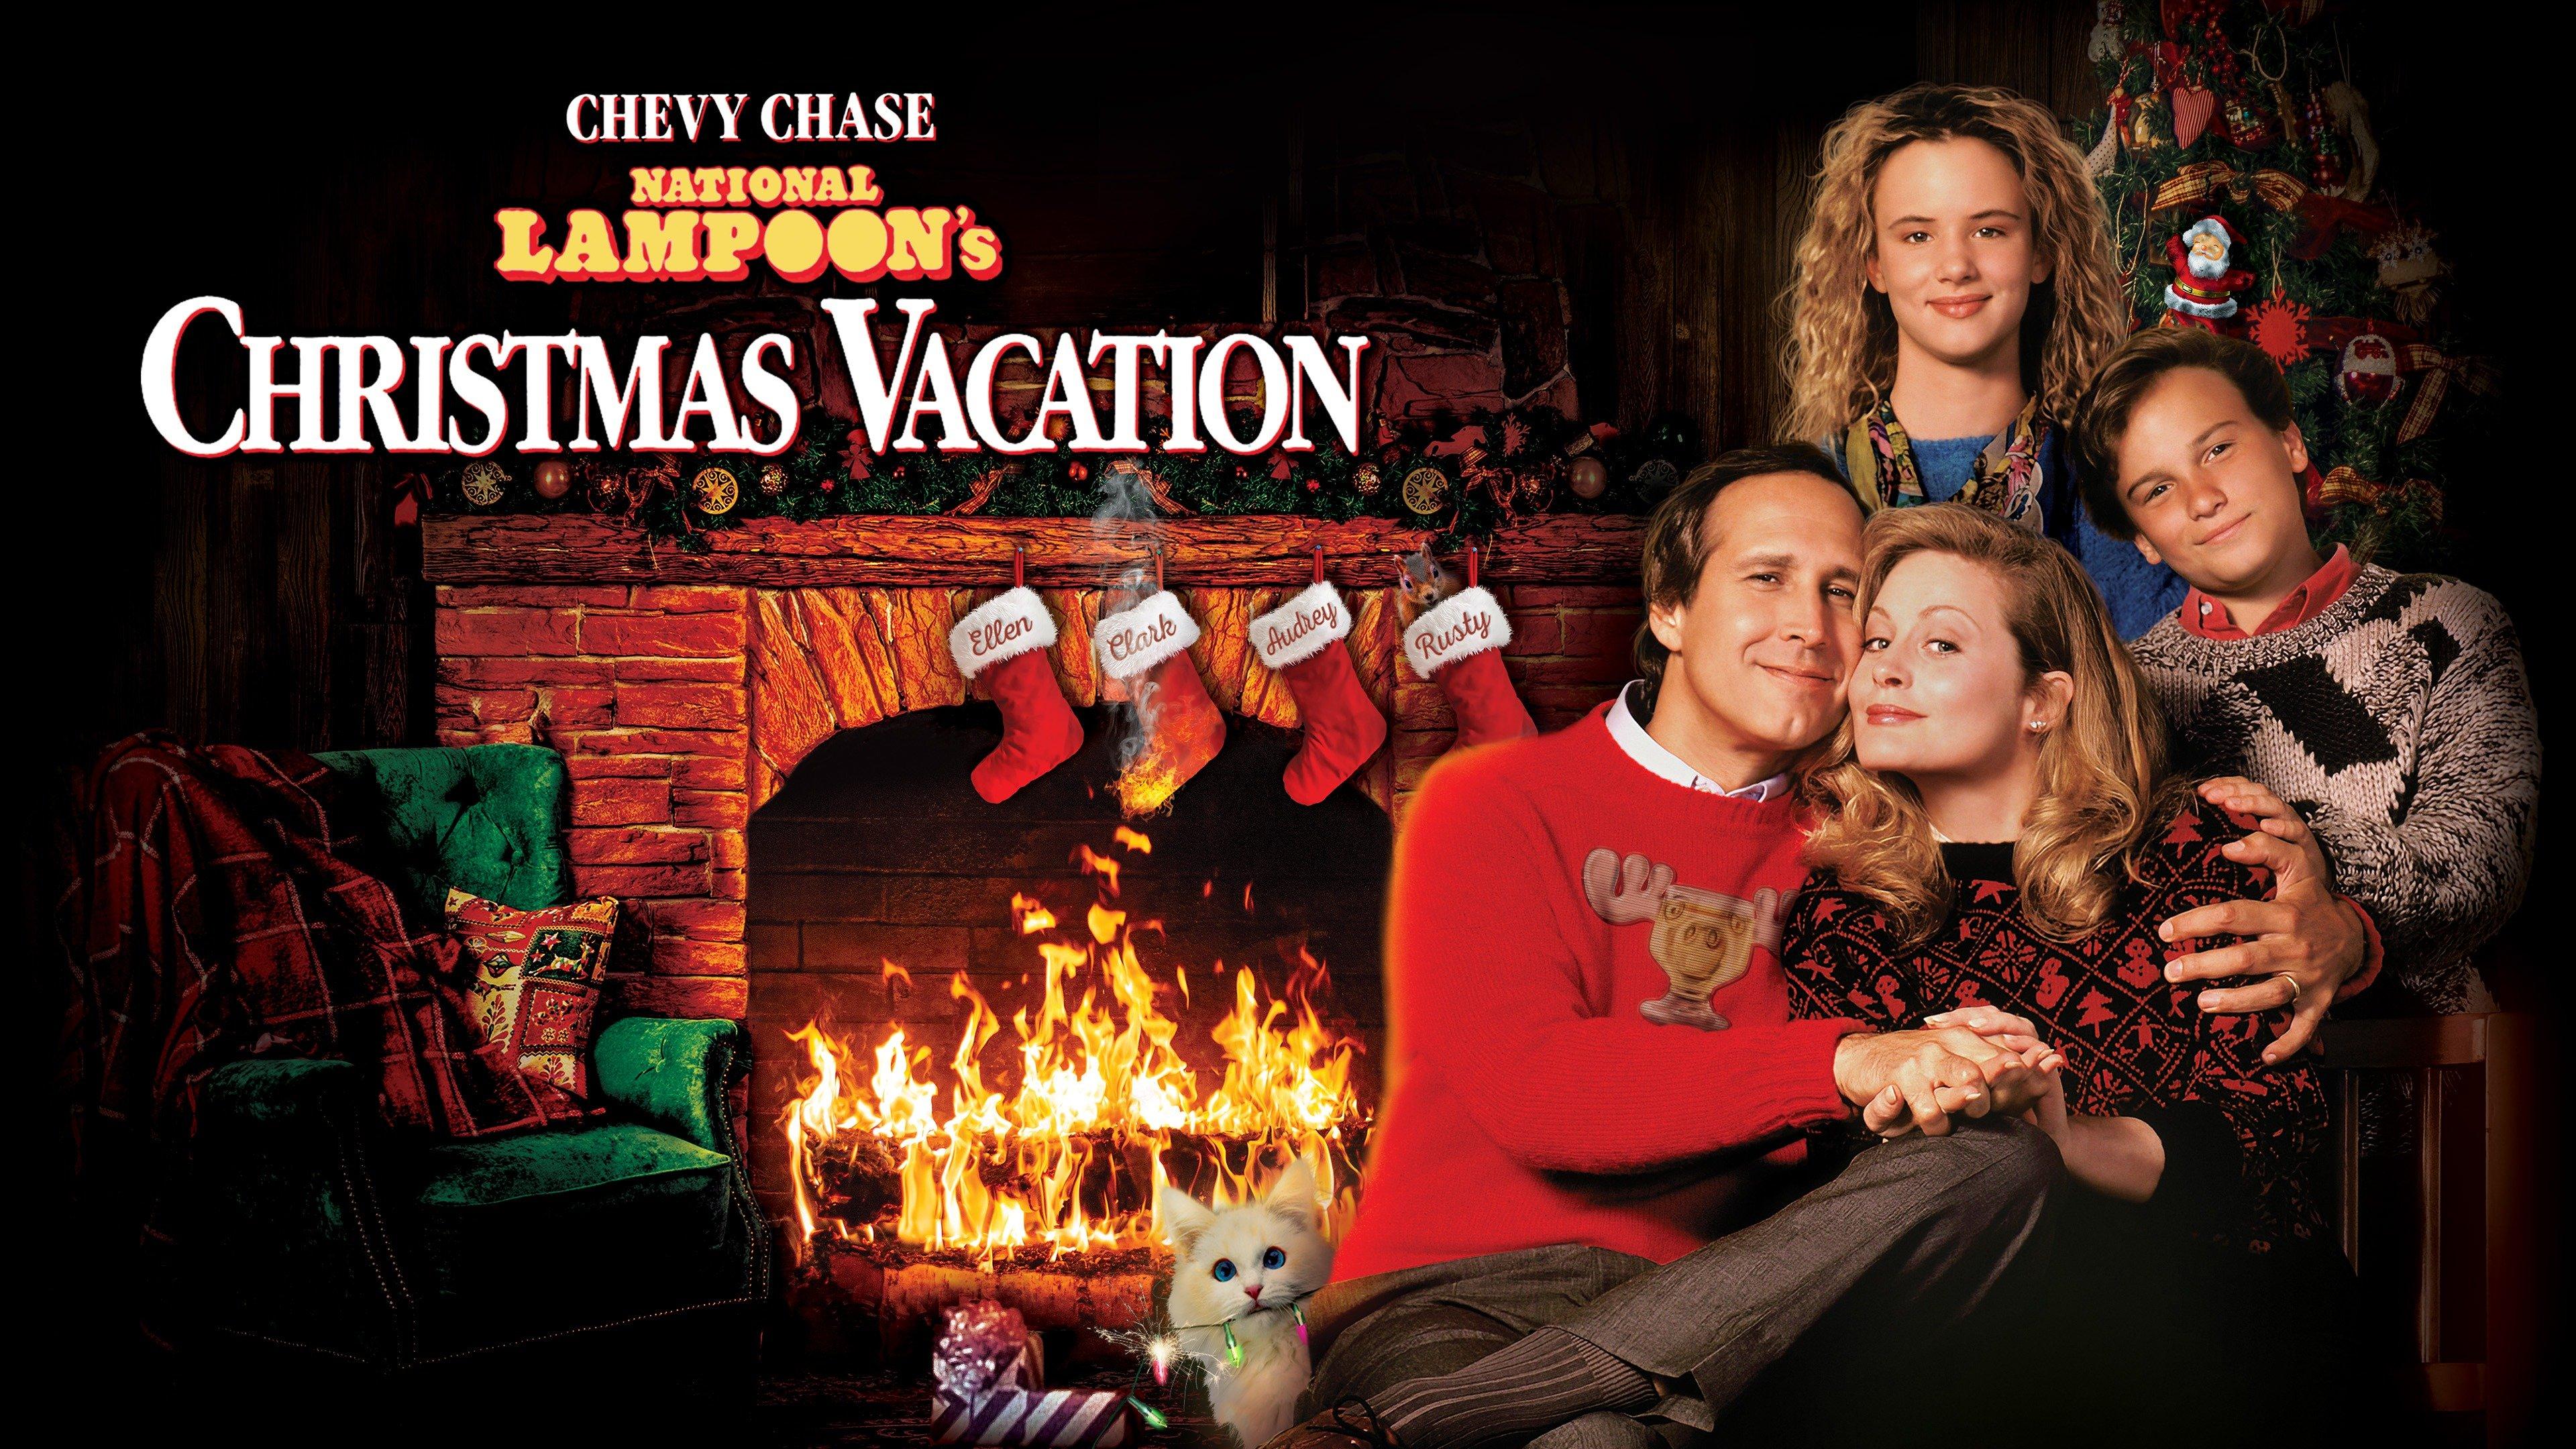 Watch National Lampoon's Christmas Vacation Streaming Online on Philo